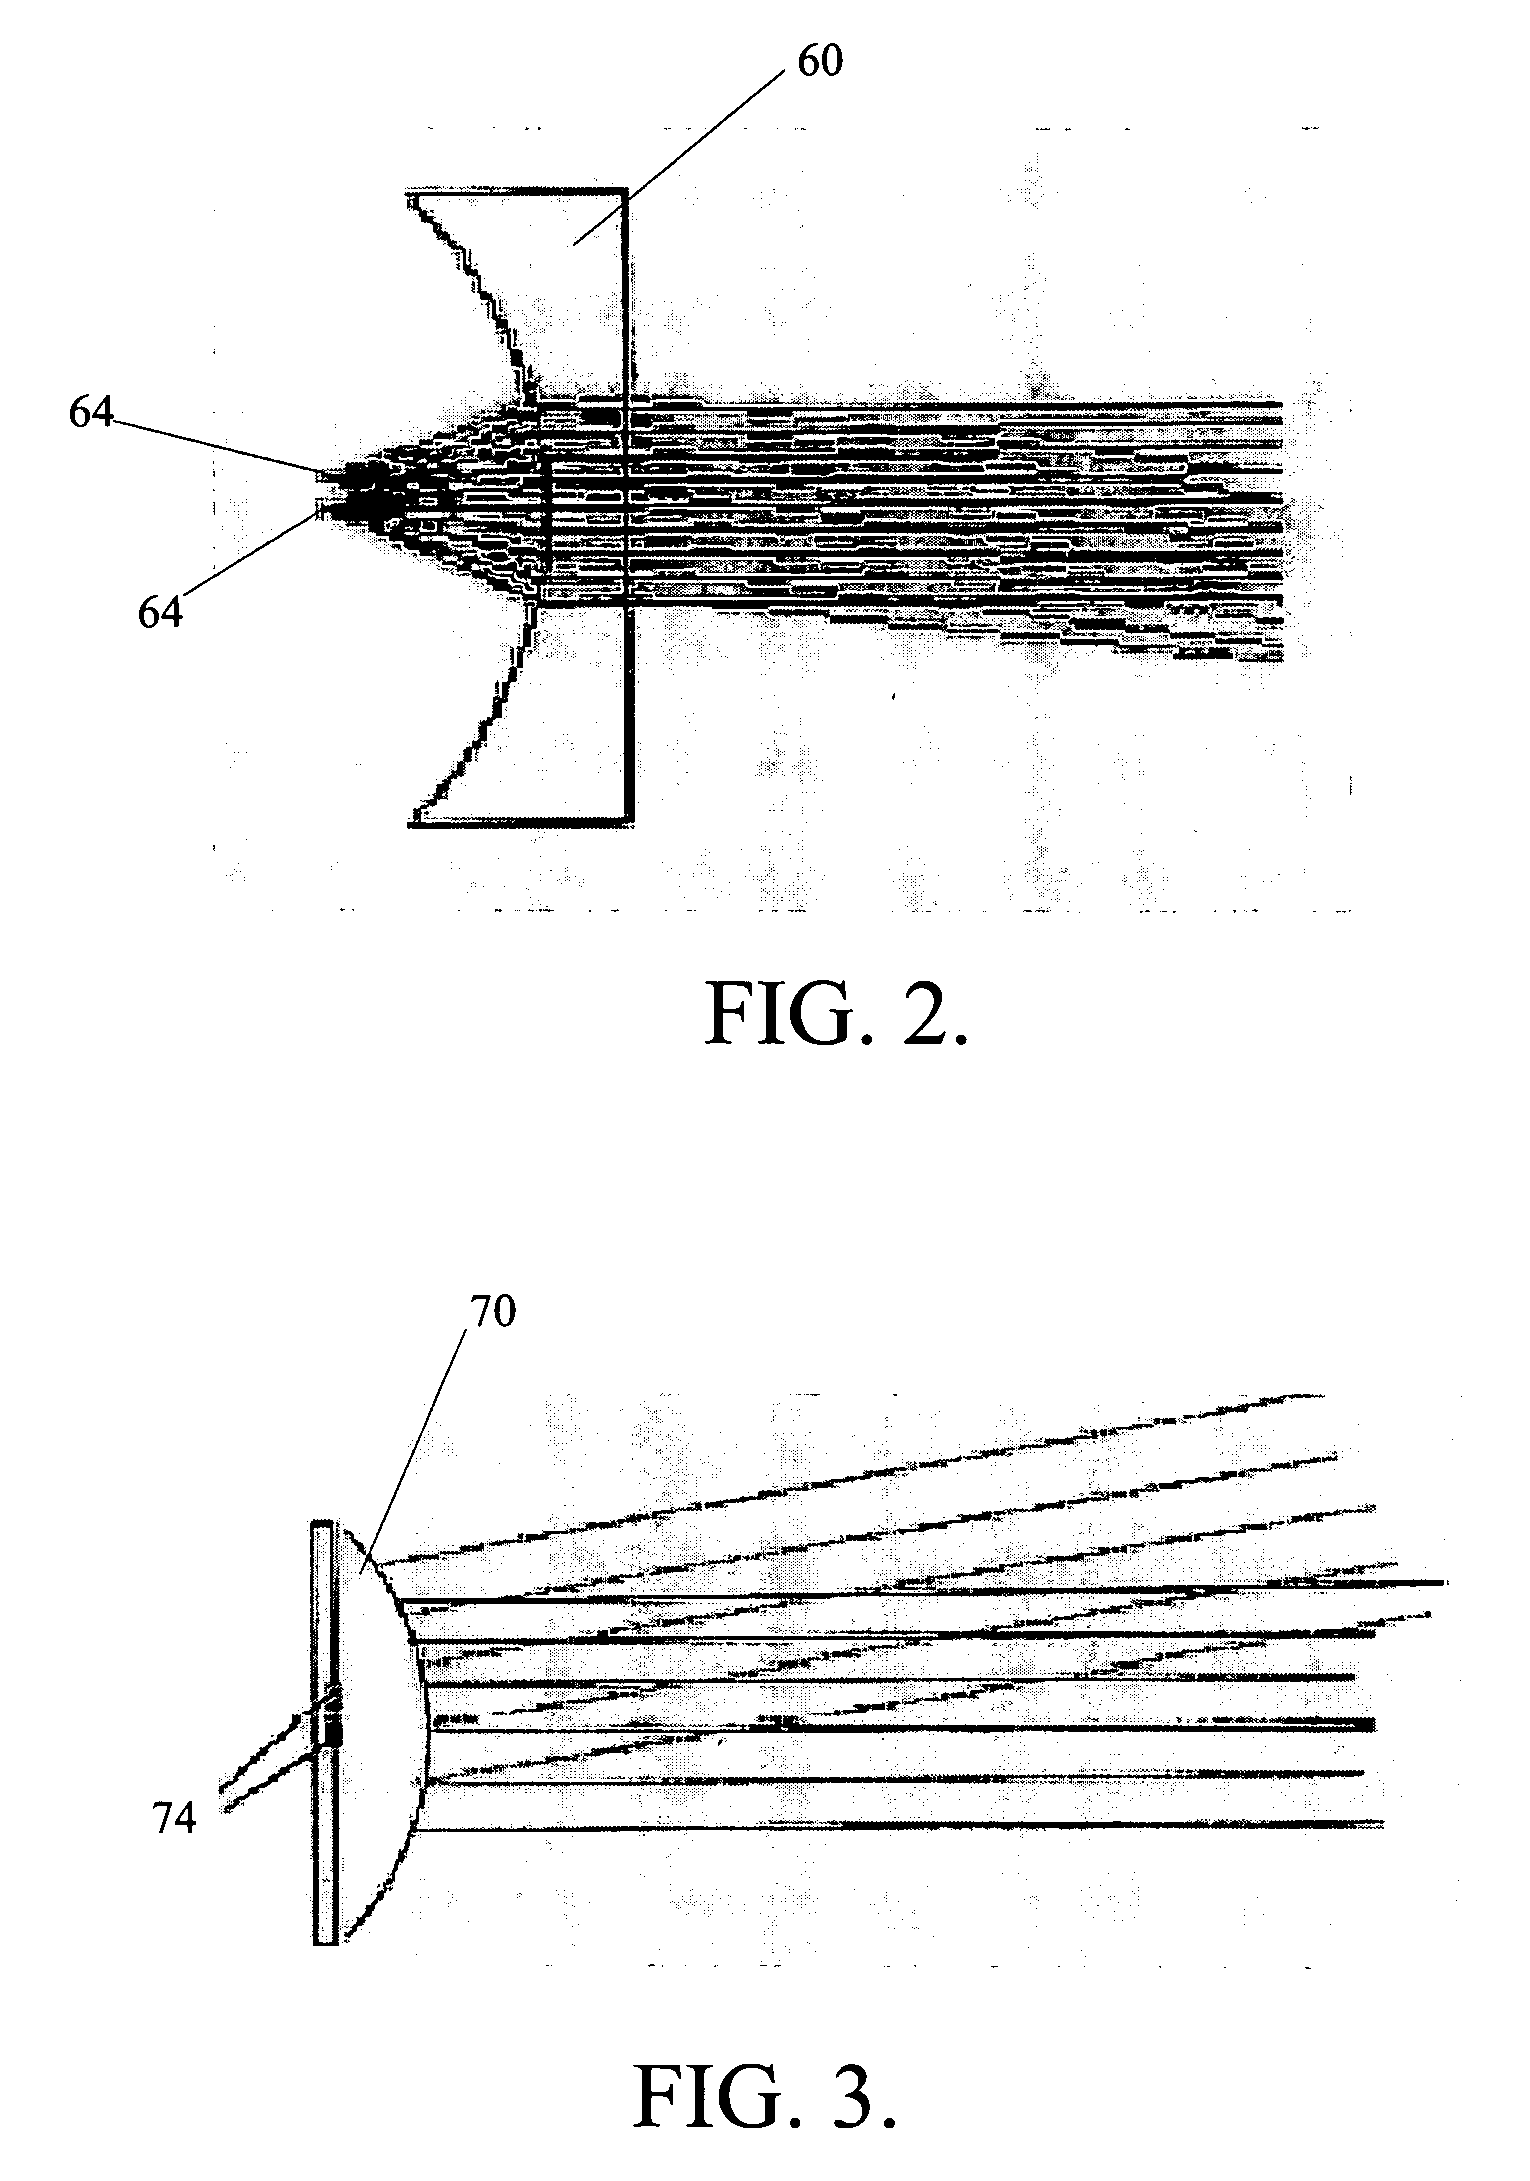 Metamaterial scanning lens antenna systems and methods